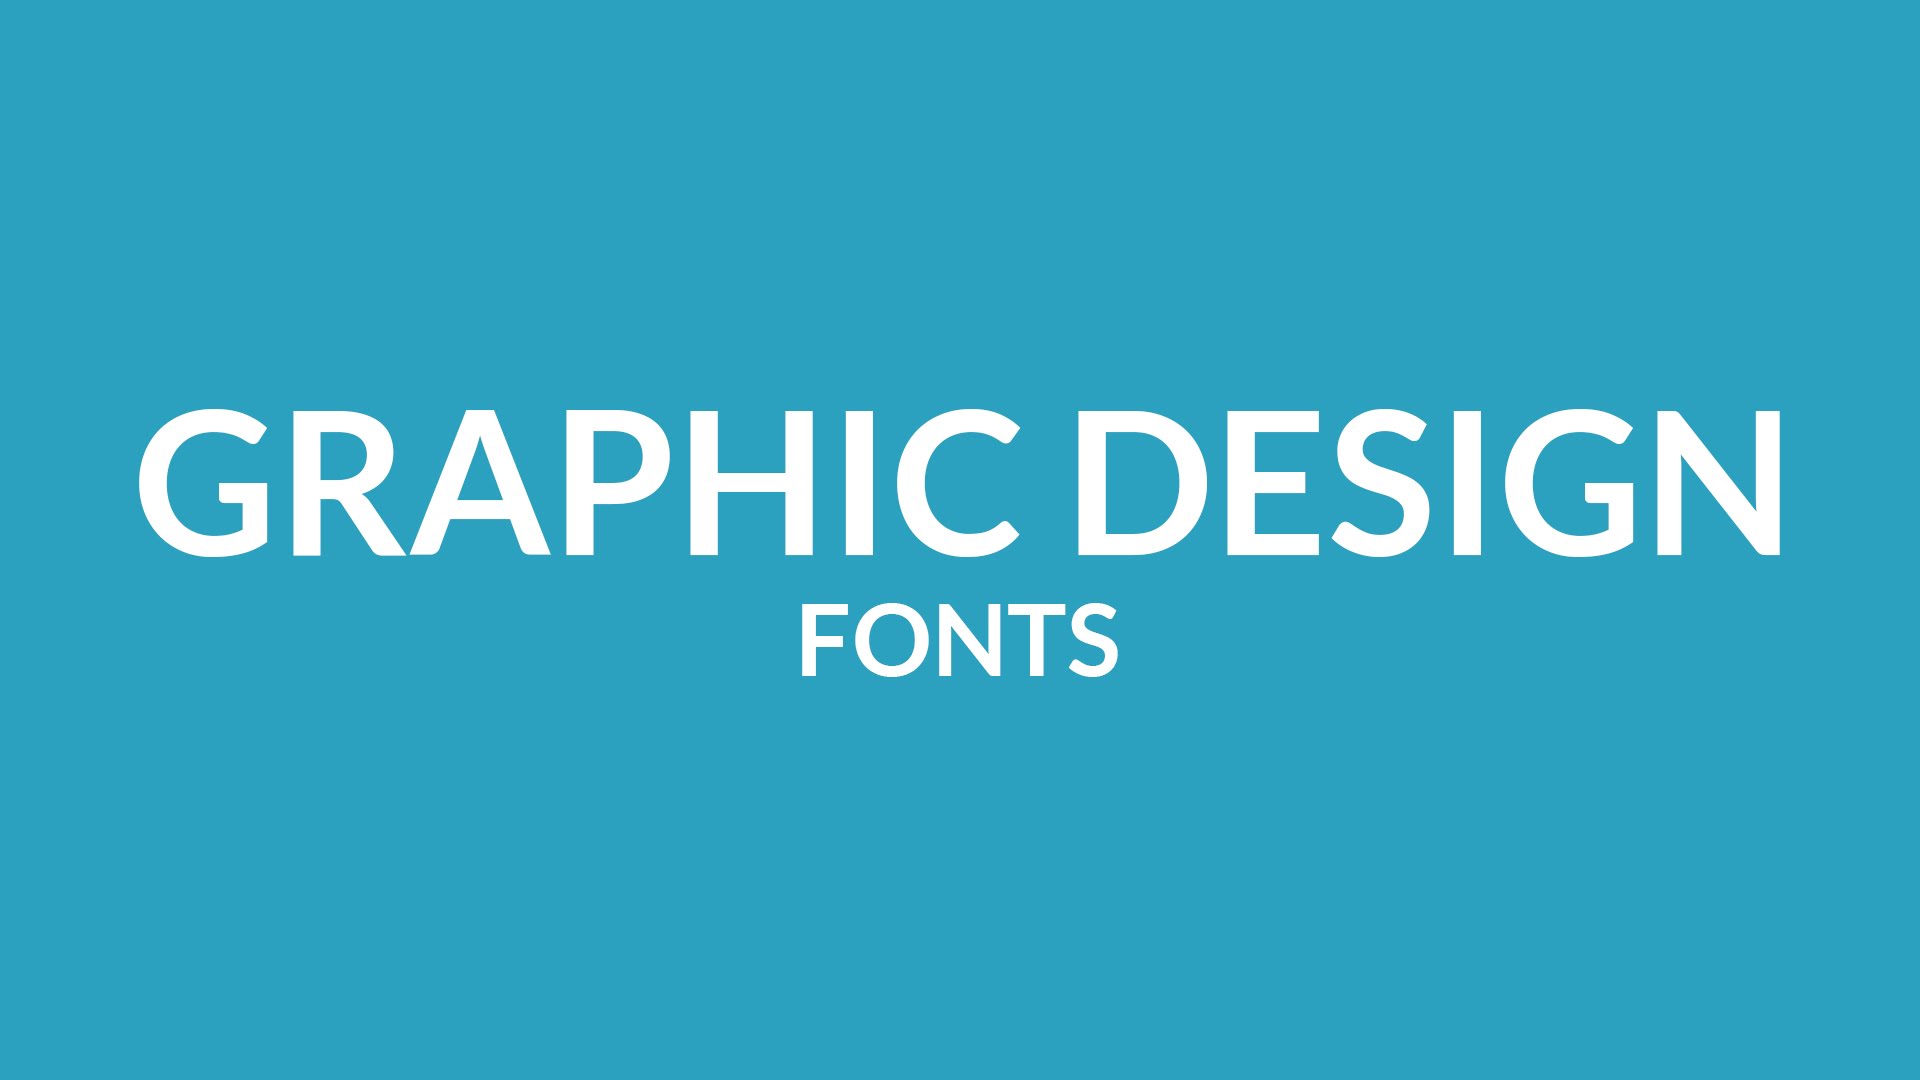 whats the best free font for a logo on illustrator